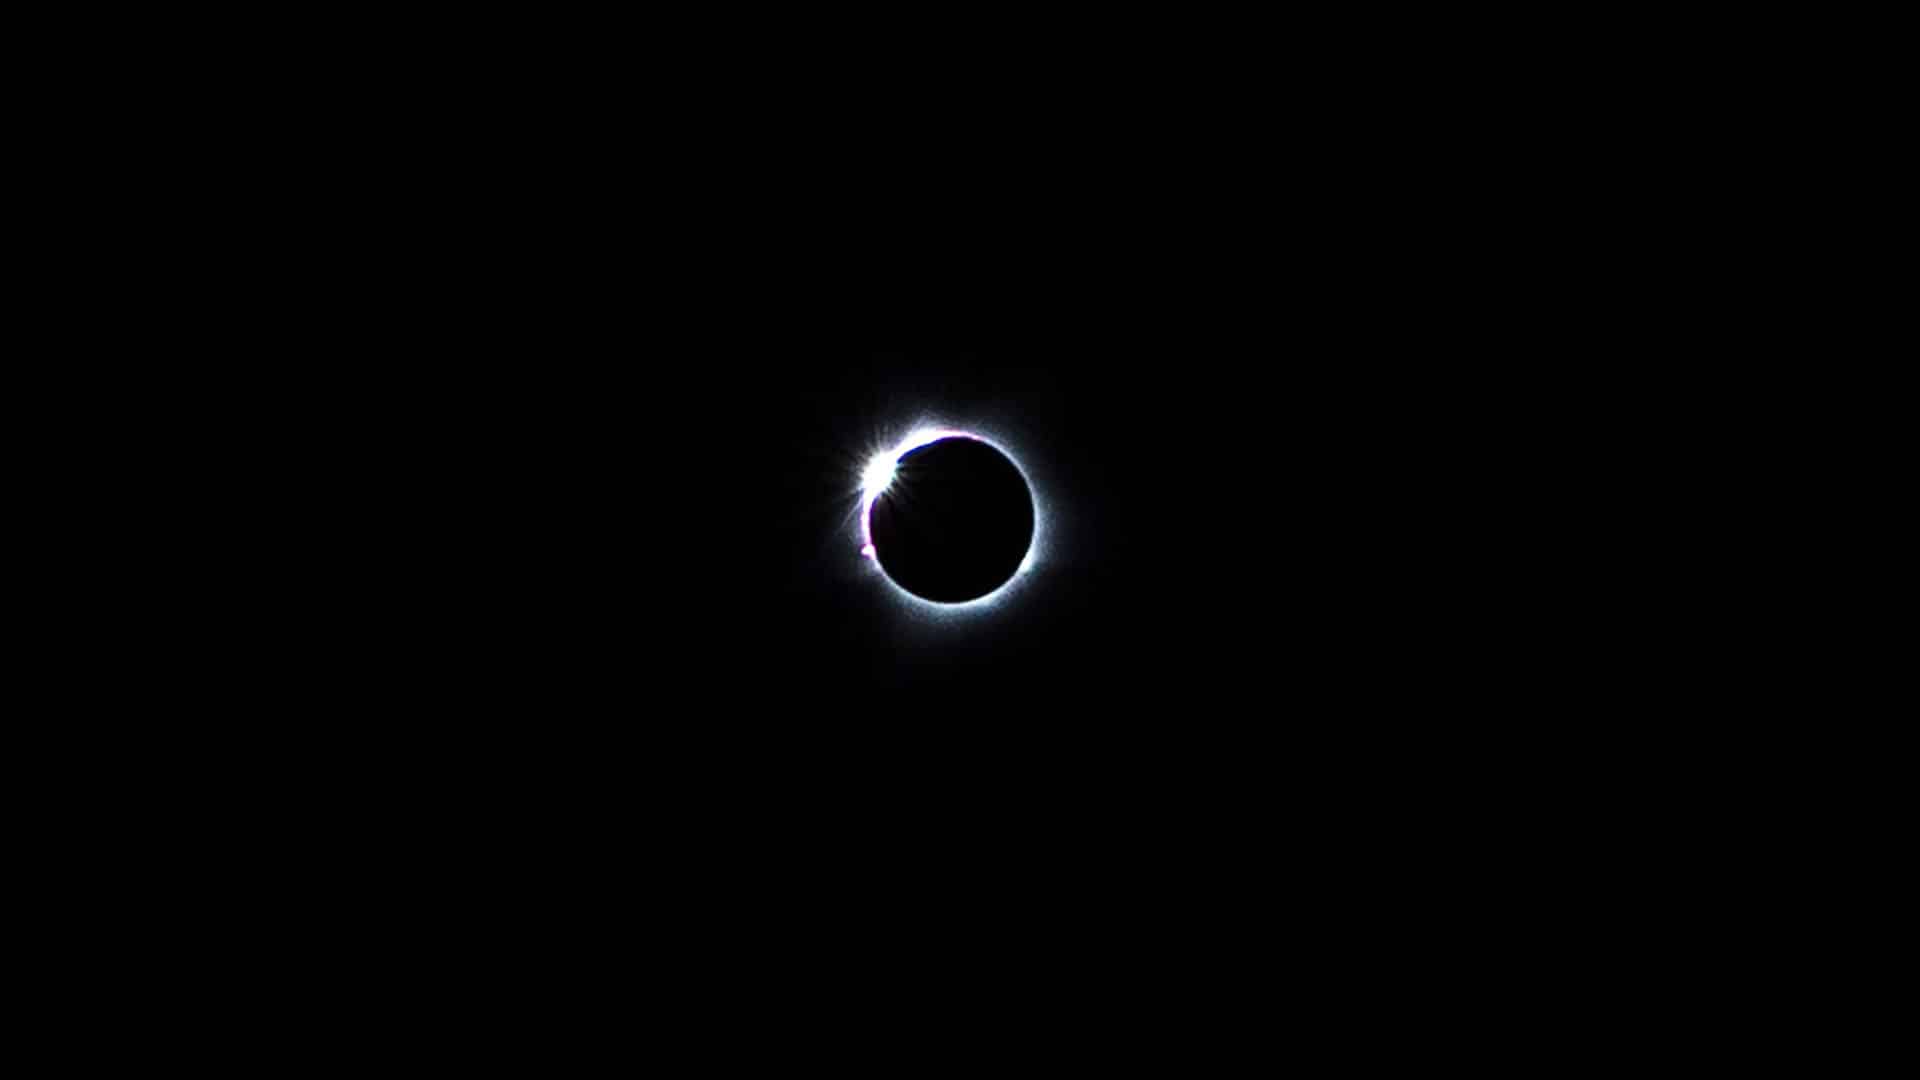 Solar Eclipse with diamond ring effect, Queensland, Australia Wall Art,  Canvas Prints, Framed Prints, Wall Peels | Great Big Canvas